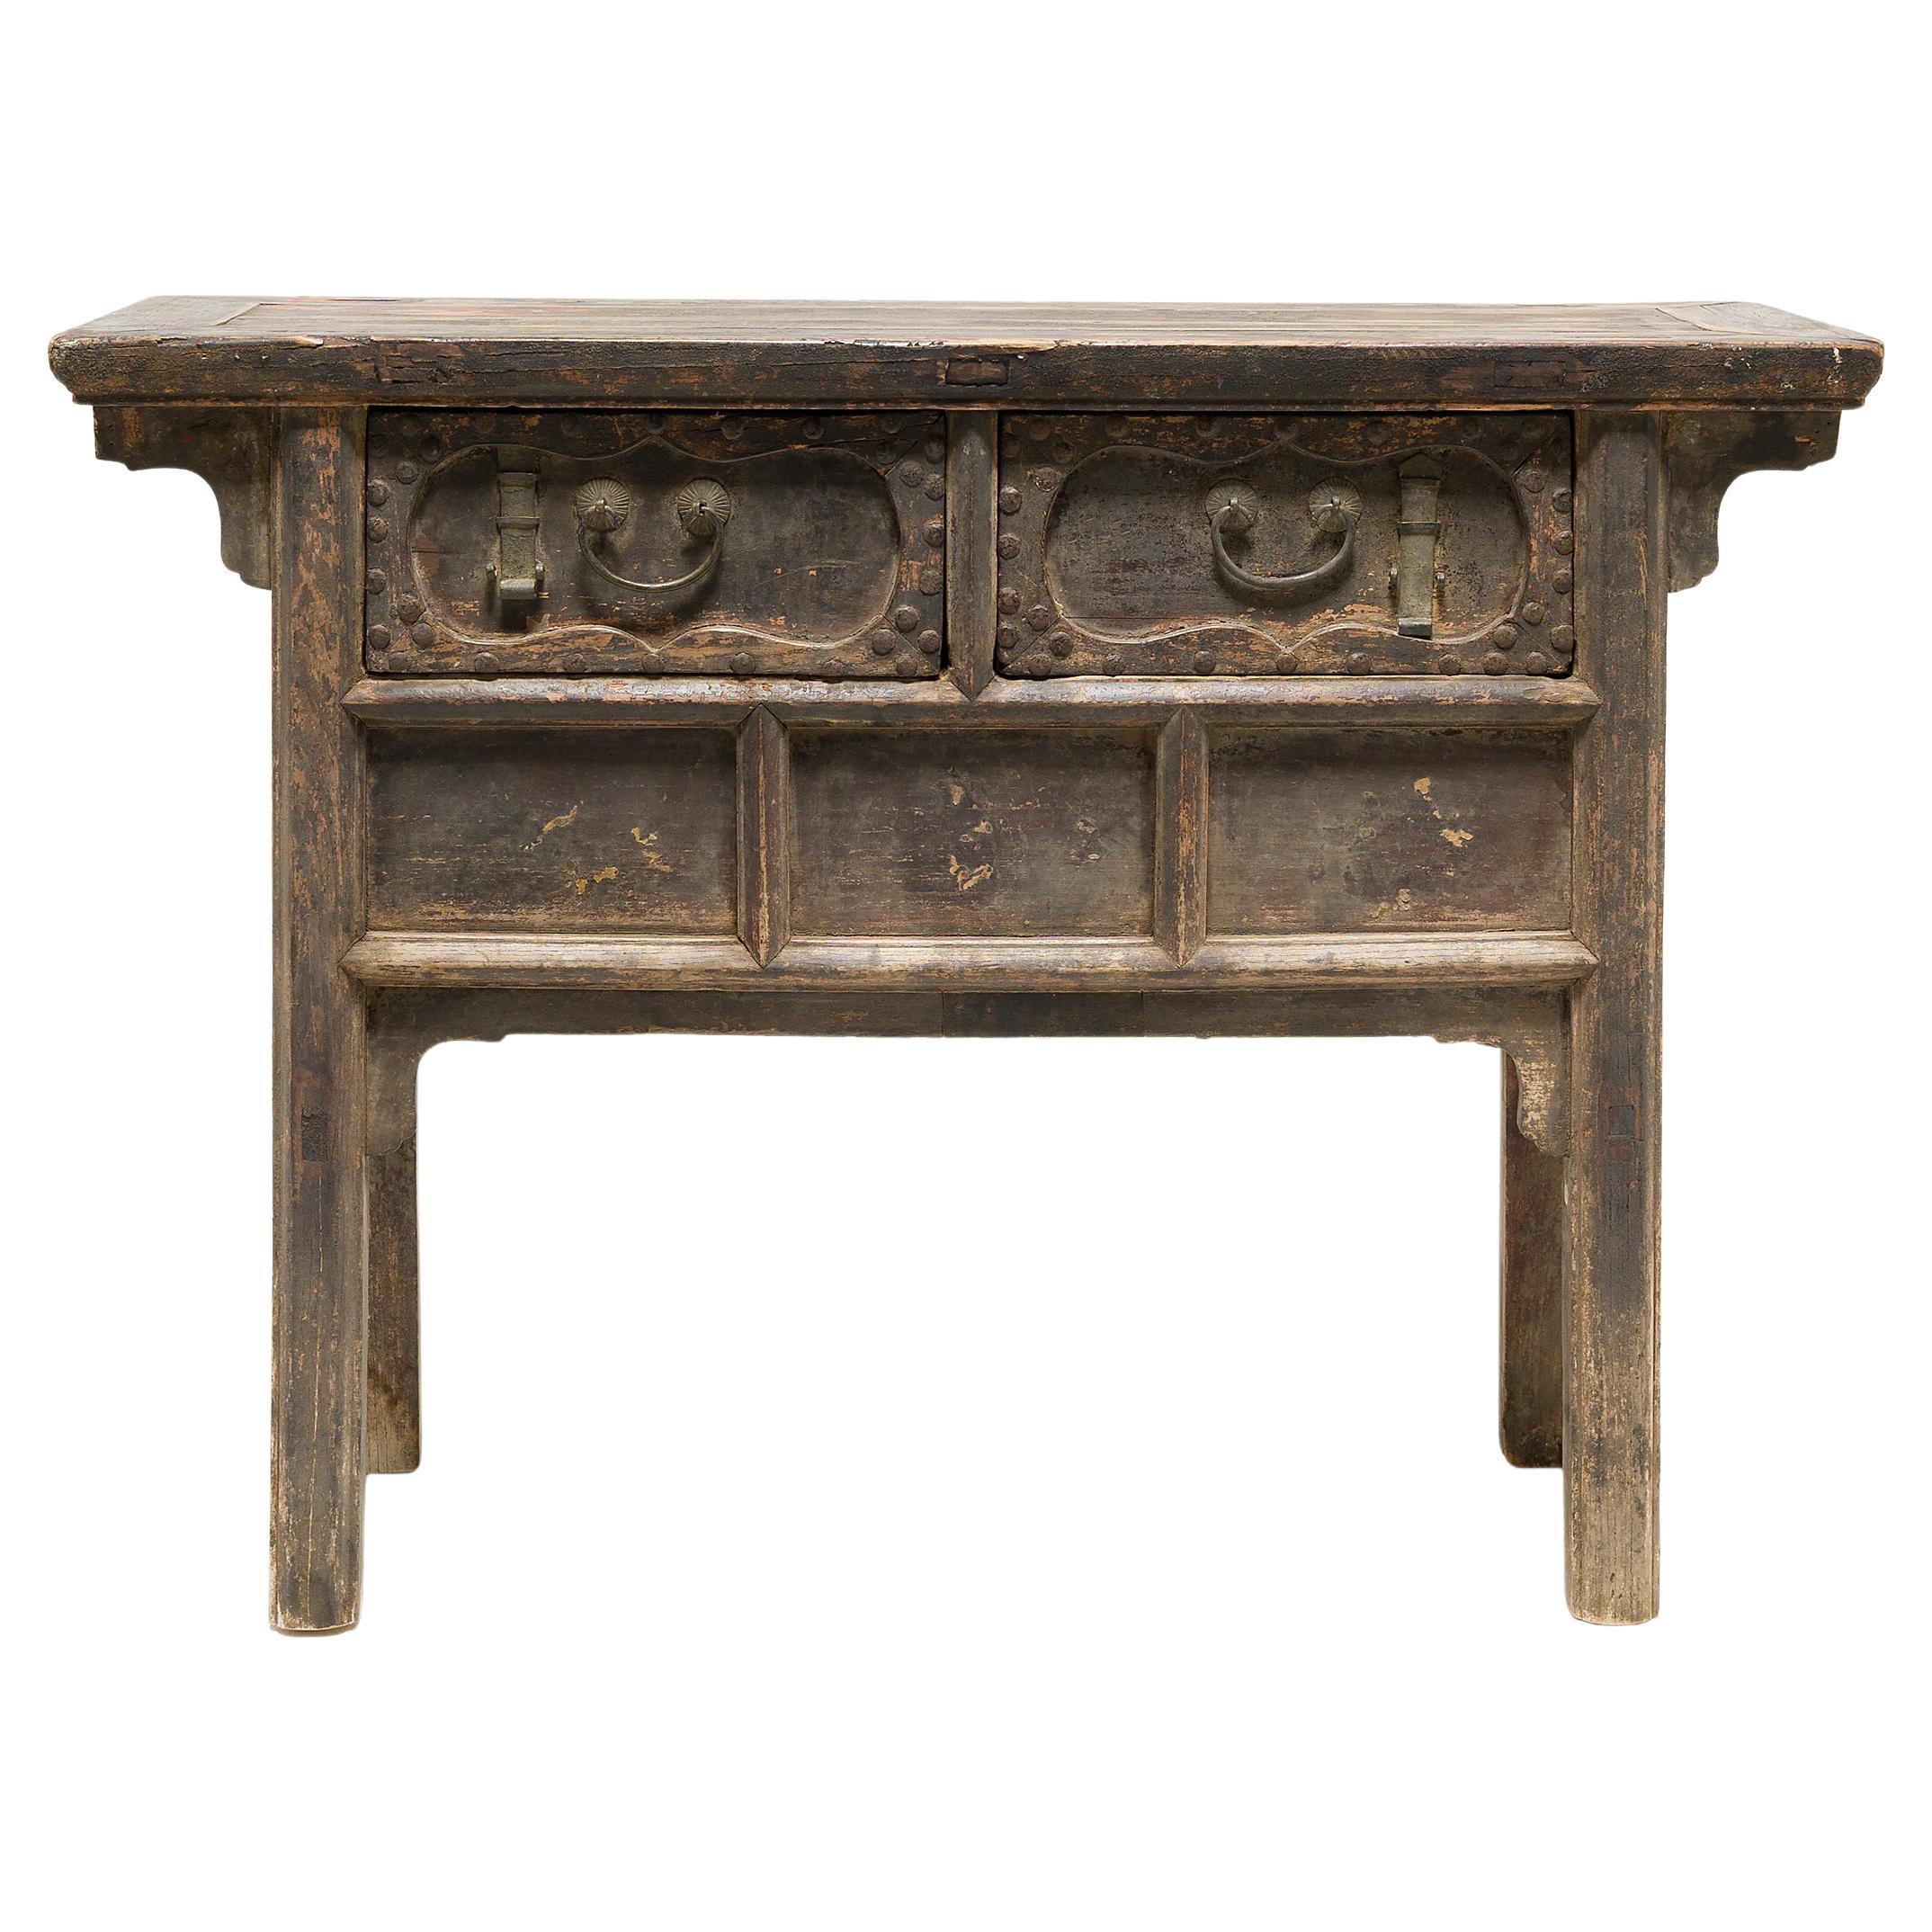 Chinese Two Drawer Offering Table, c. 1800